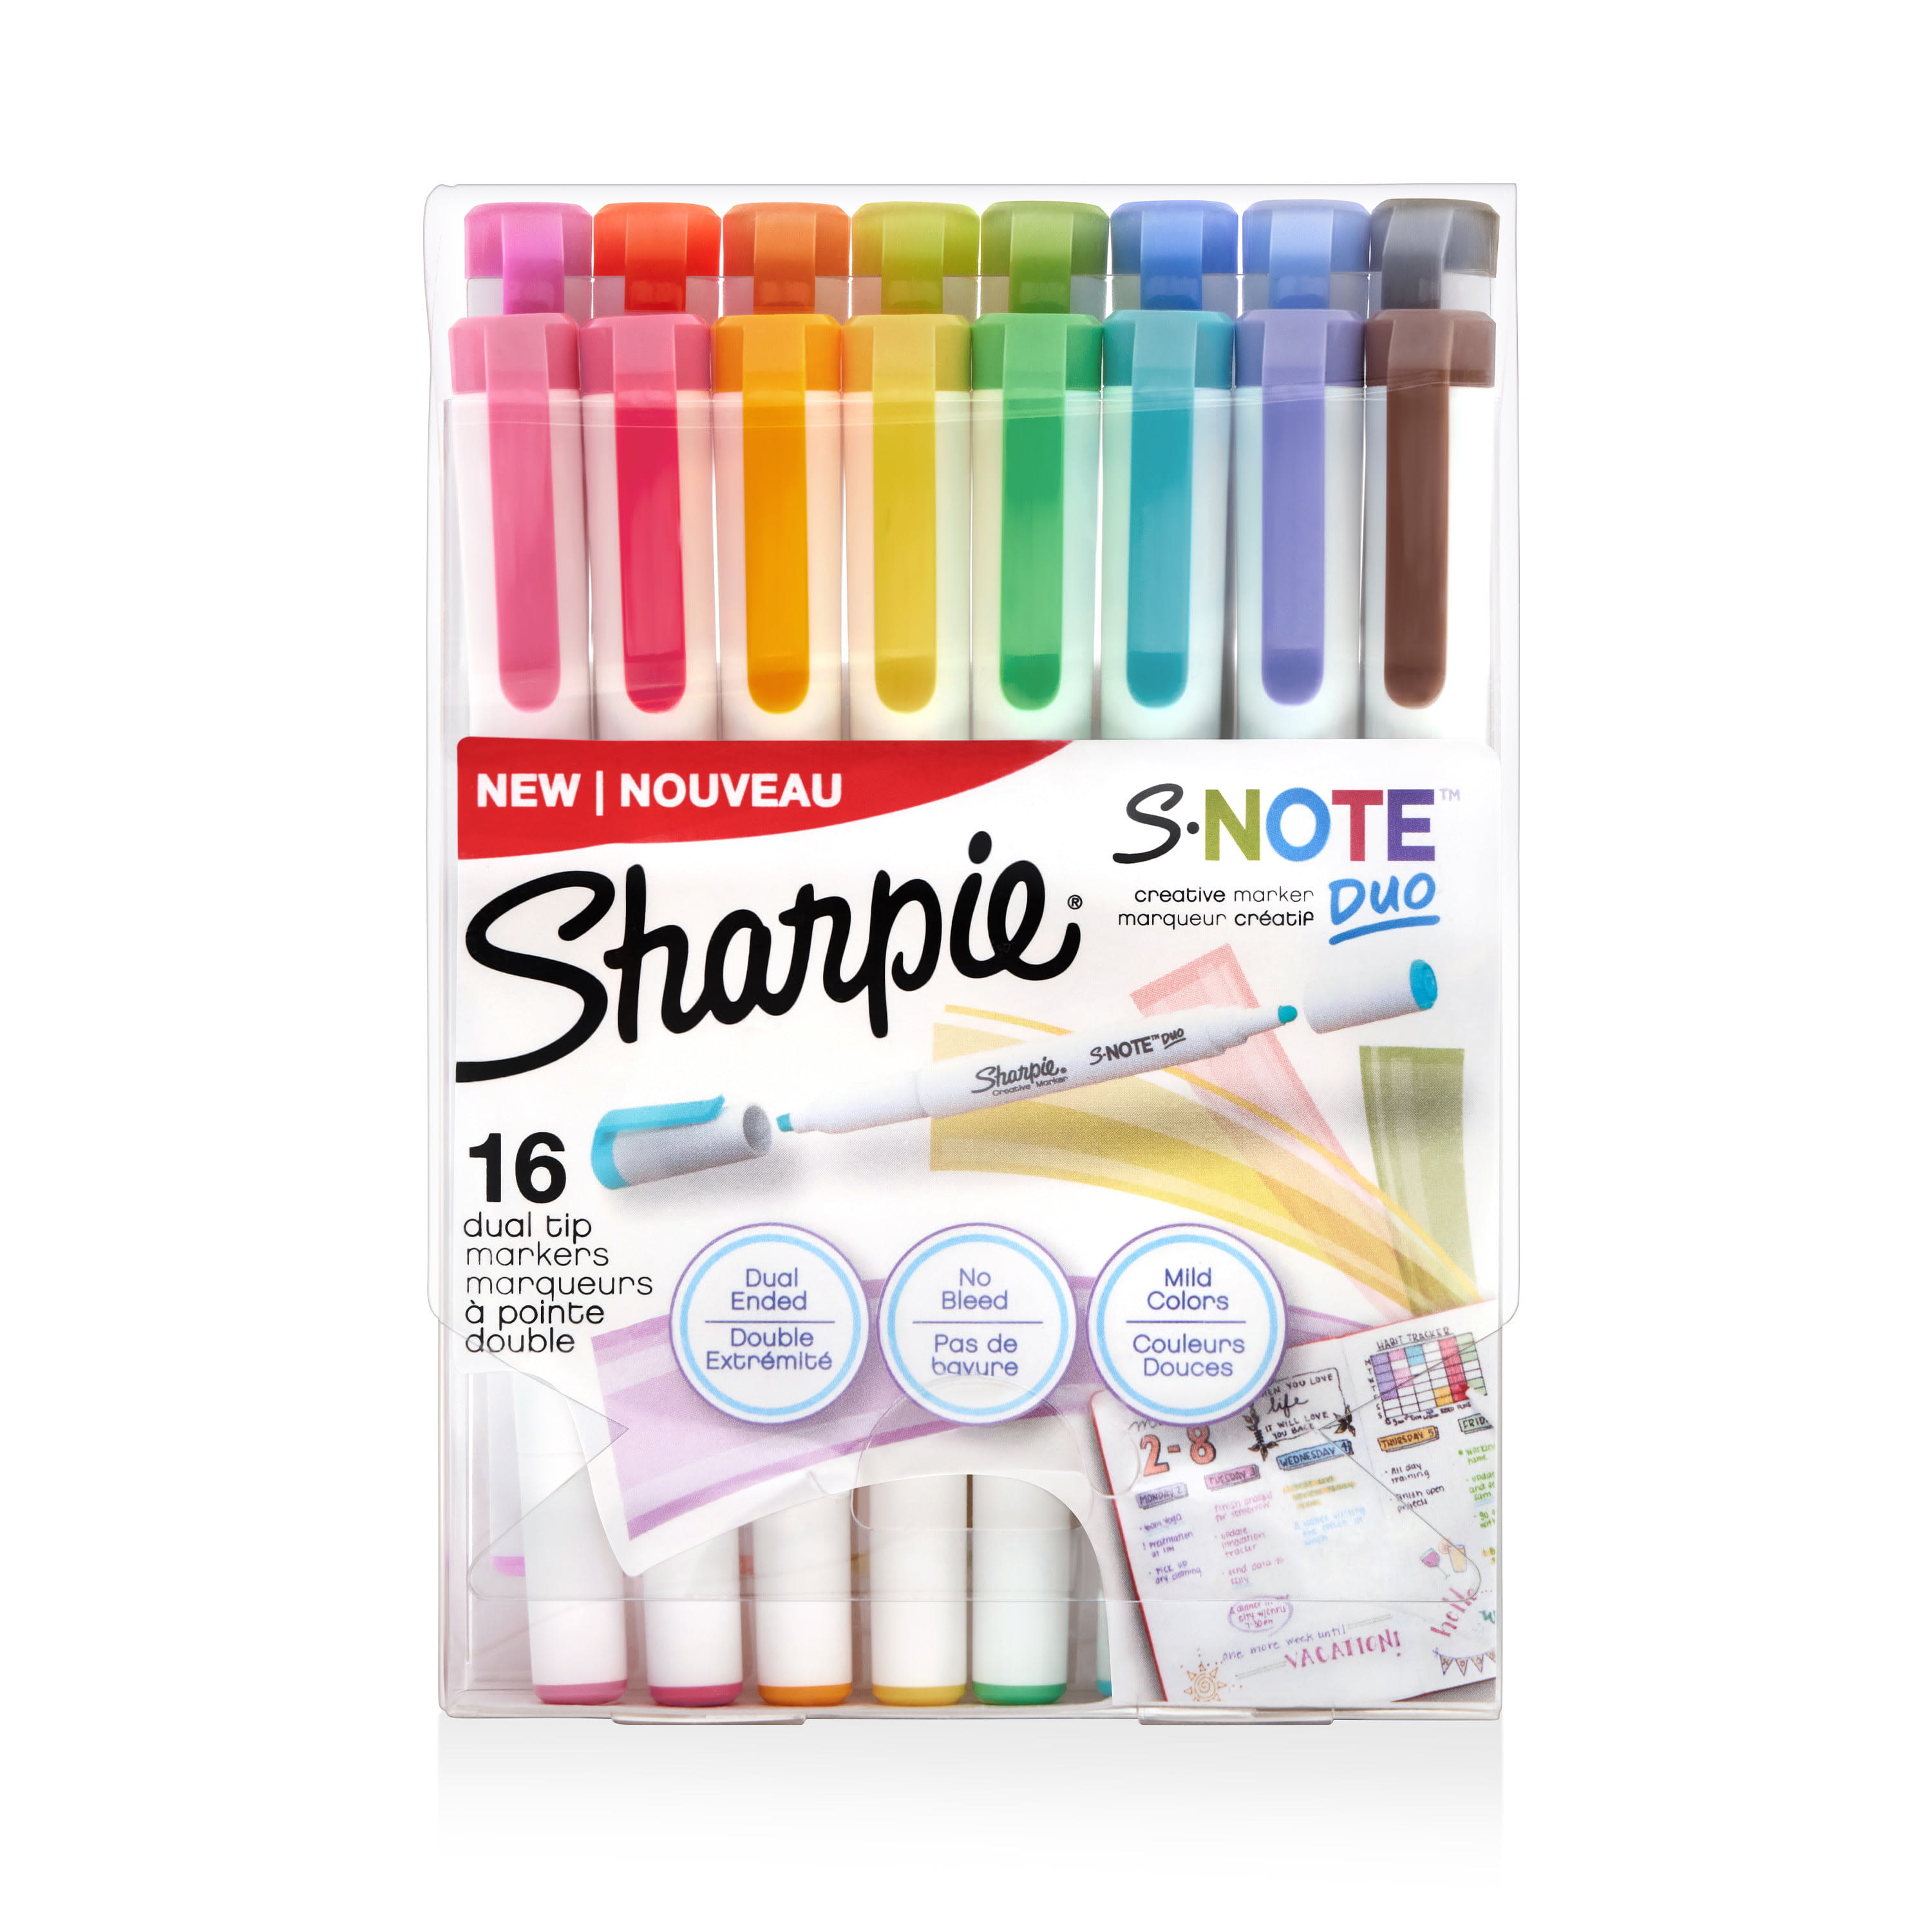 Sharpie Retractable Permanent Markers, Fine Point, Black, 2 Count - DroneUp  Delivery